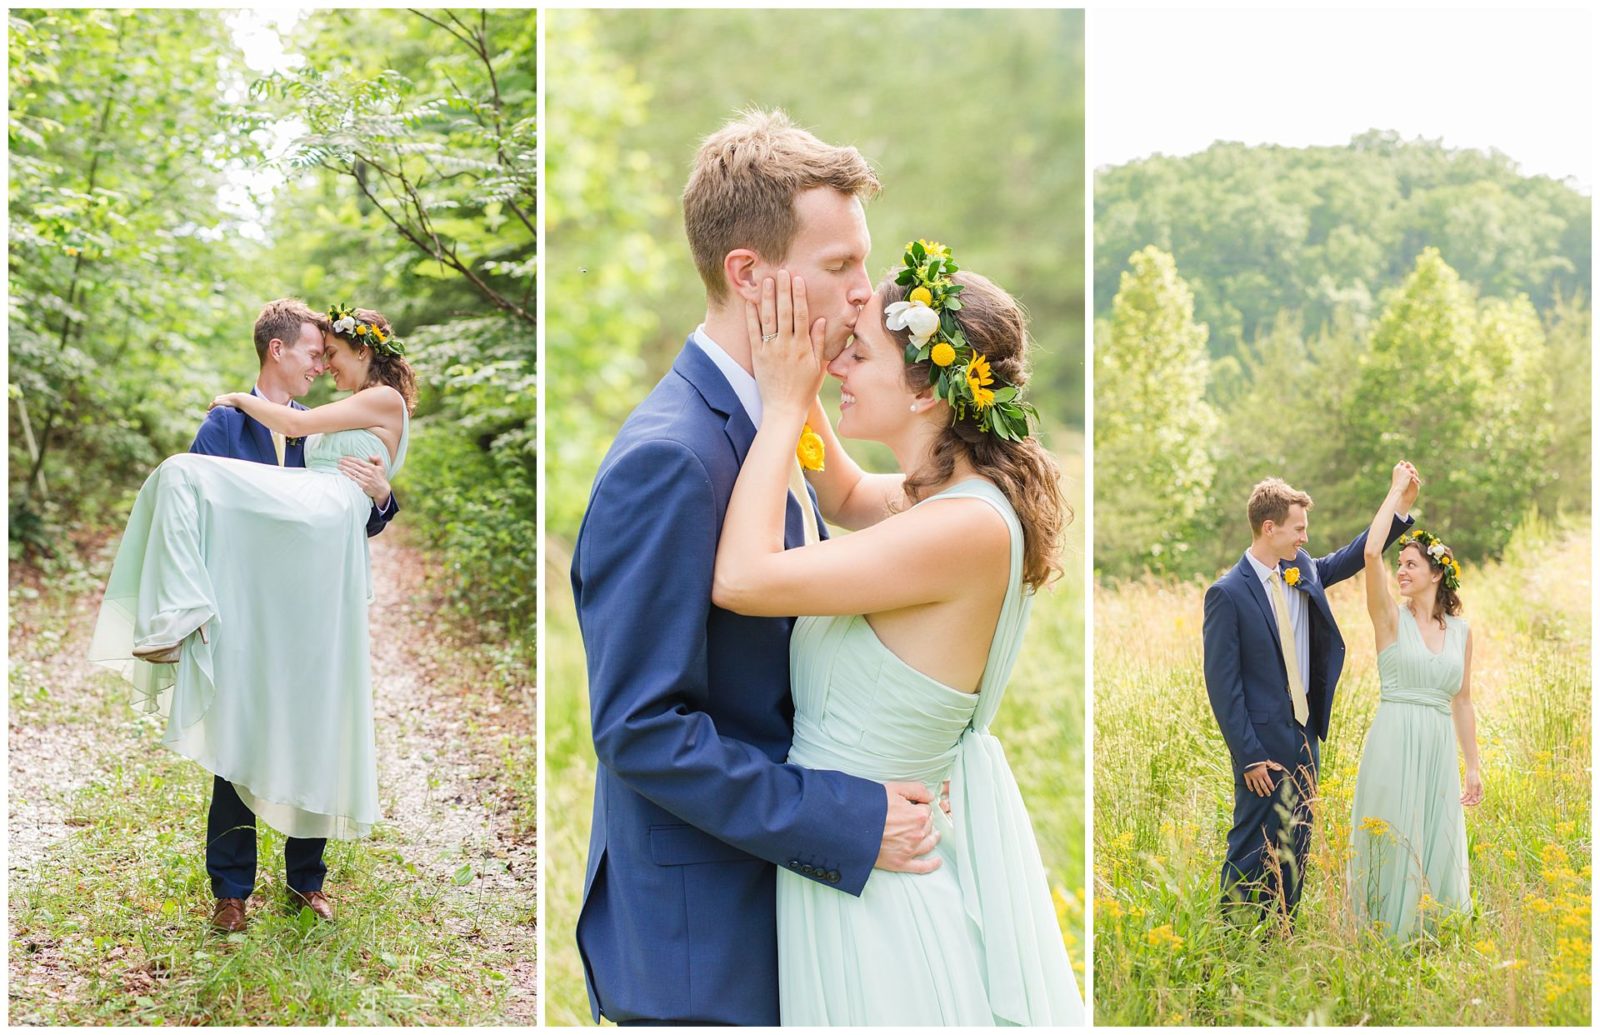 Summer wedding at the Cliffview Resort Lodge in the Red River Gorge